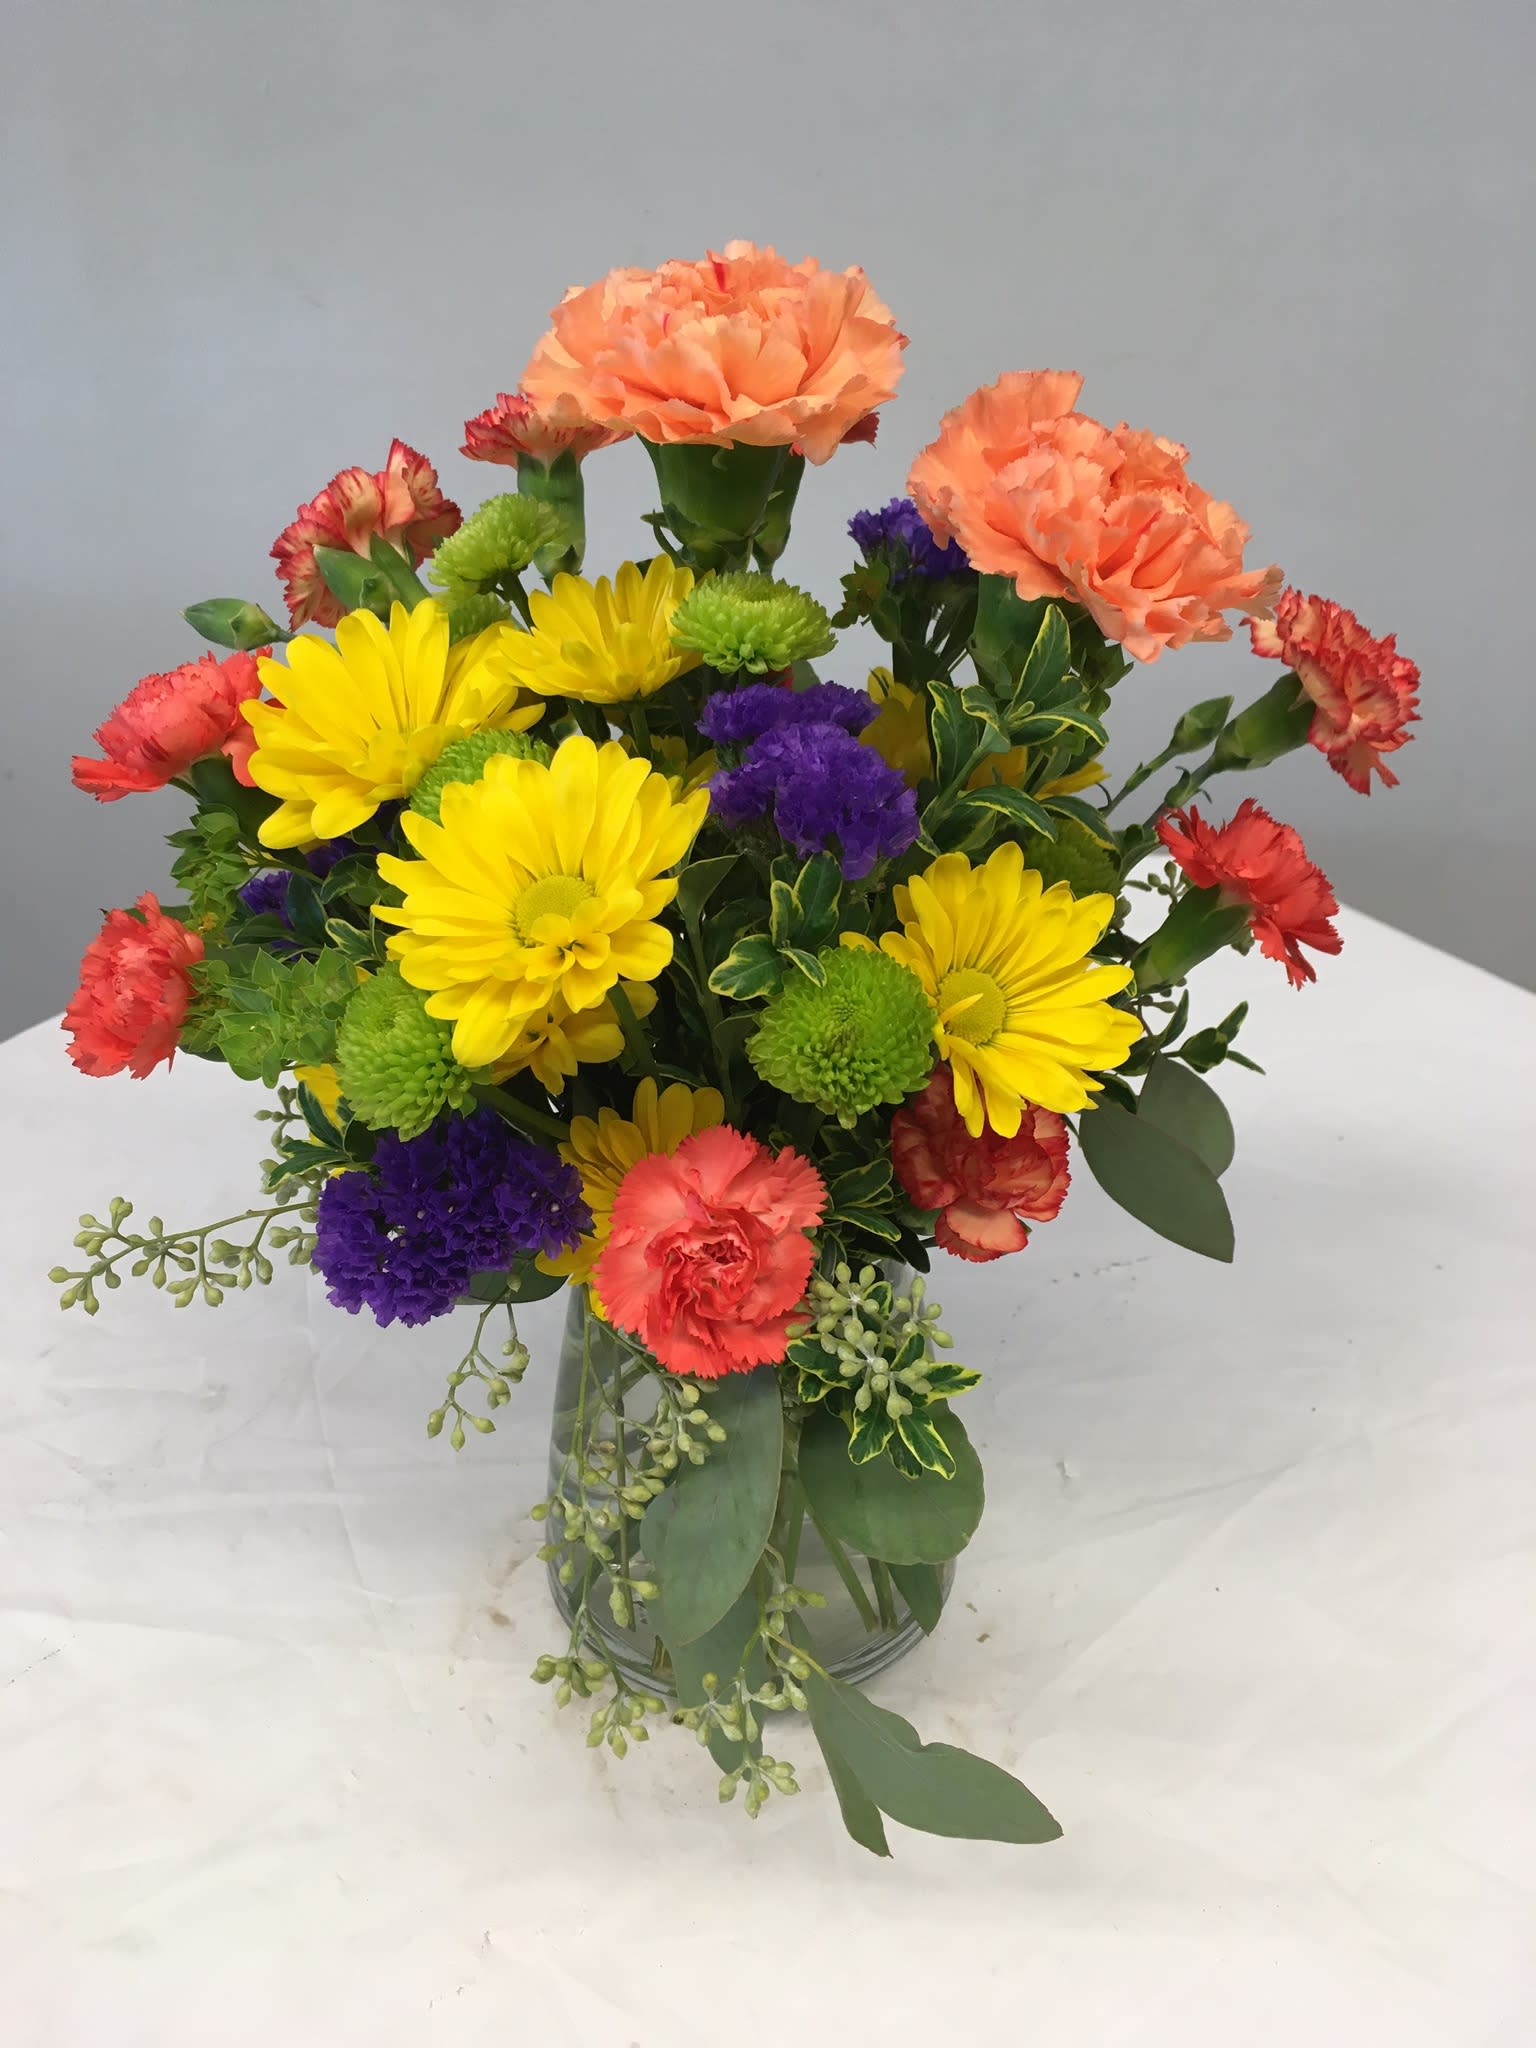 Simply said - A simple glass vase with assorted carnations, daisies and mums arranged in colors of orange, yellow, green with accents of purple